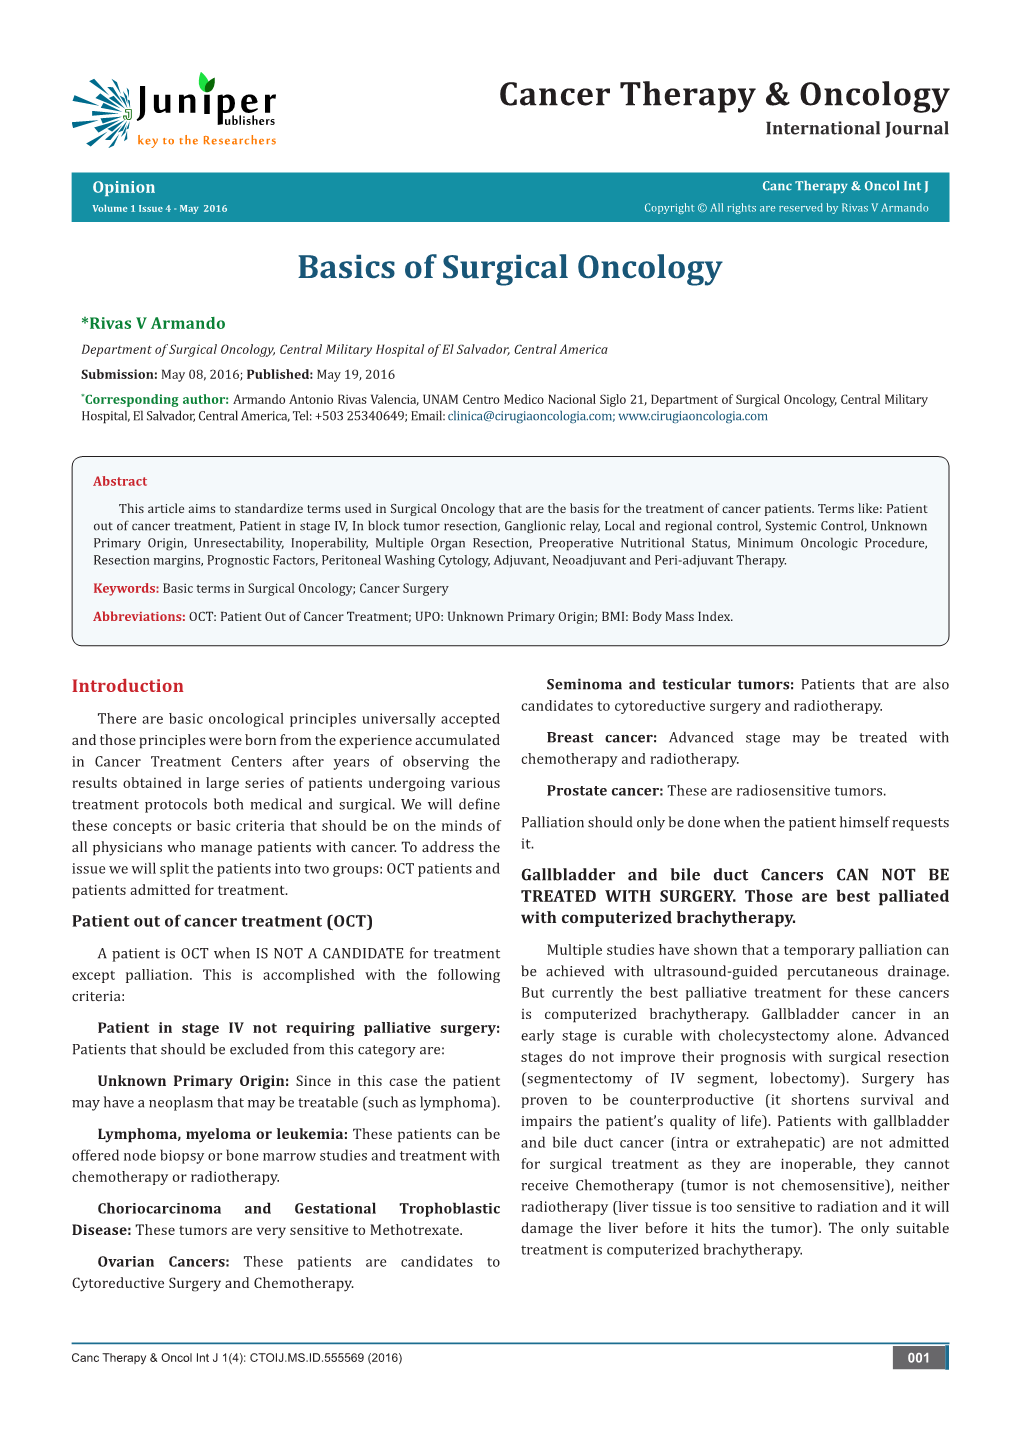 Basics of Surgical Oncology